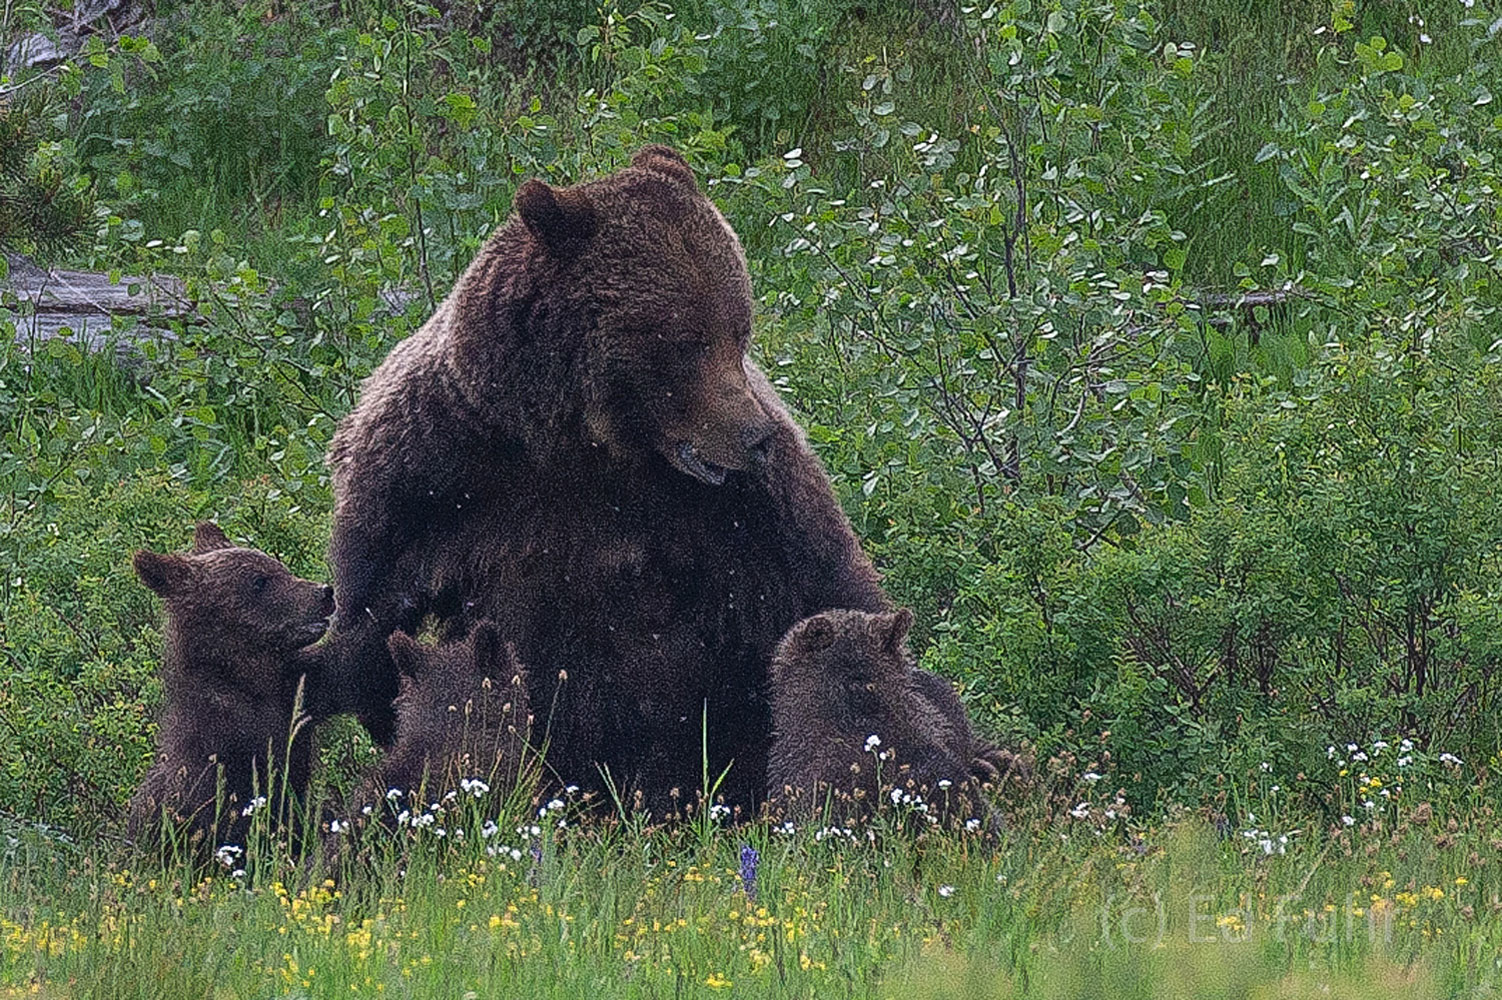 Grizzly 399 reacts to an overeager cub who has nursed a bit too roughly.